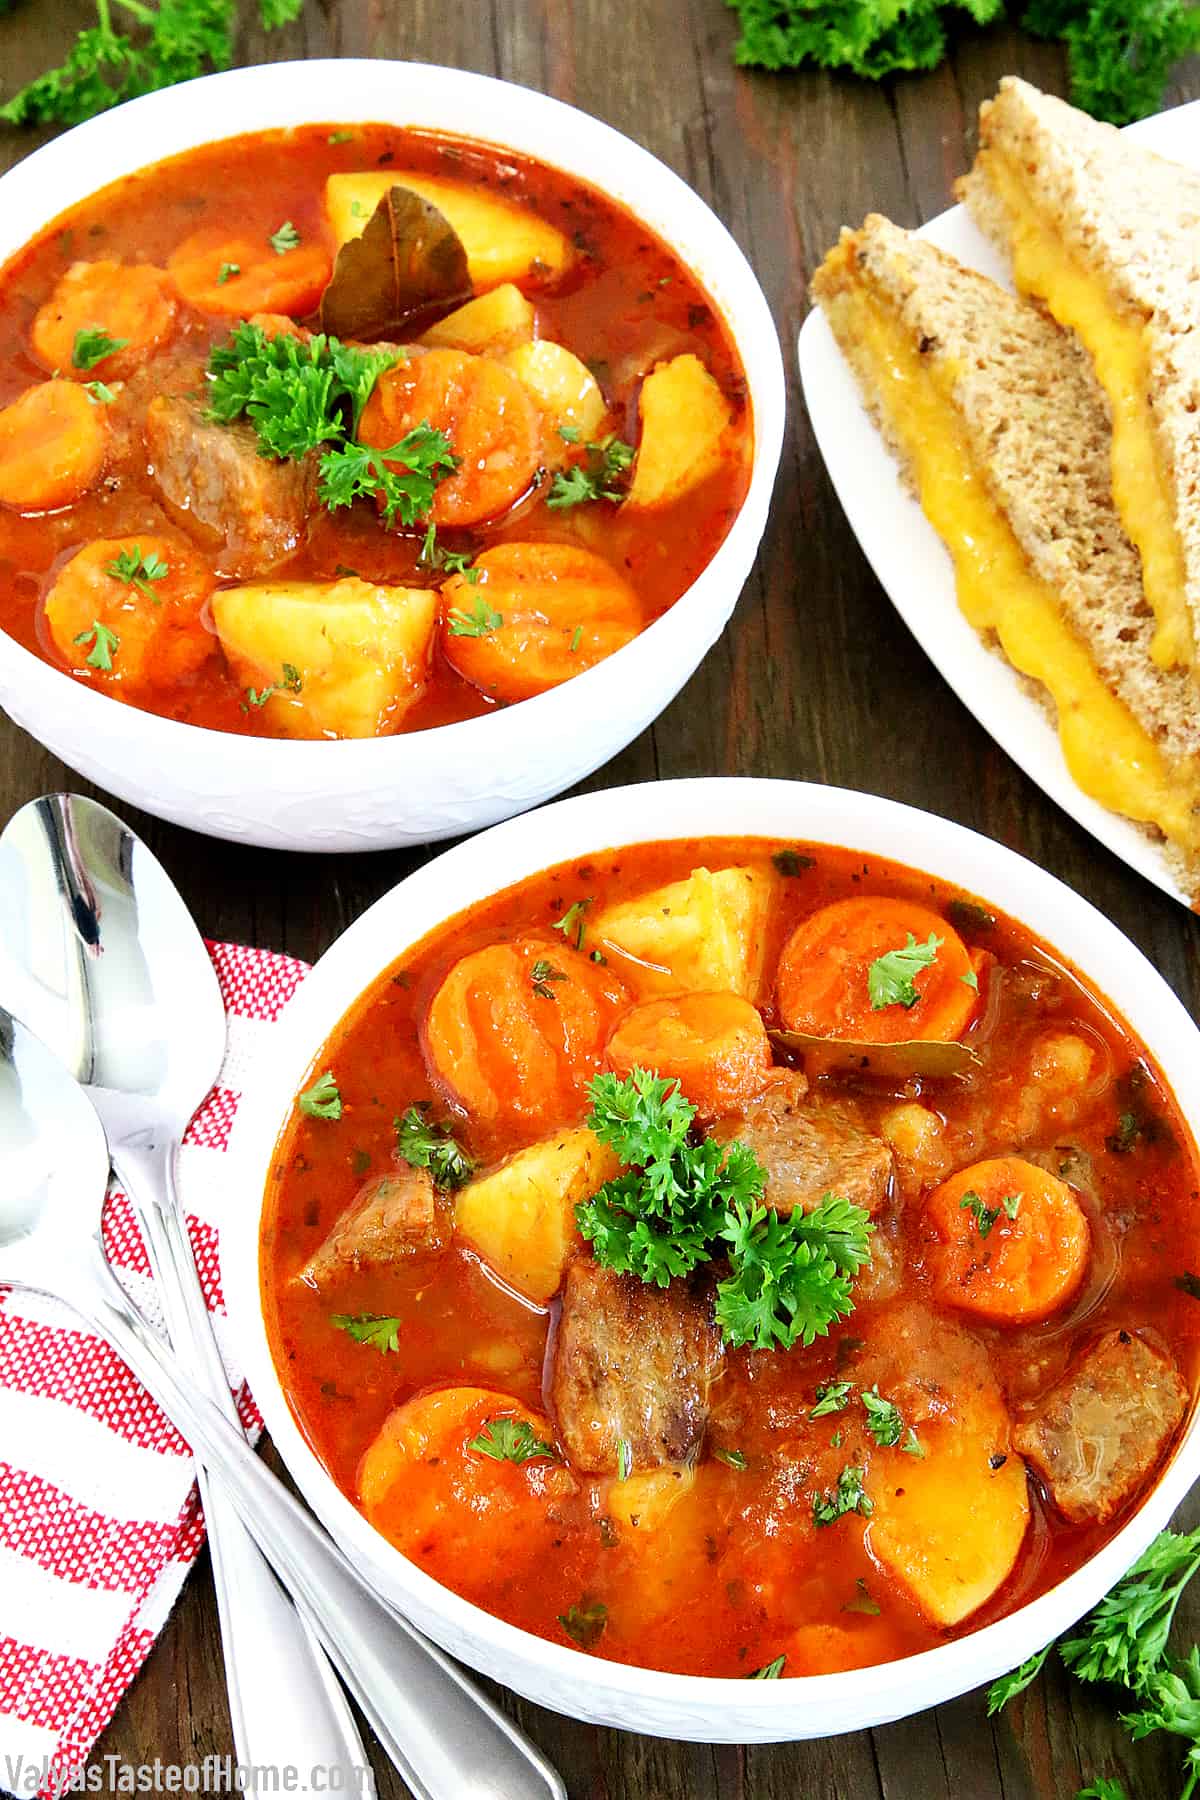 Fall is here, folks! And so is warm comfort food. What can be cozier, hearty, and comforting than a hot bowl of Best Instant Pot Beef Stew on a cold Fall season day to go along with broiled cheese sandwiches? This mouth-watering richness is delicious, savory and loaded with vegetables. #beefstew #instantpotbeefstew #thebestbeefstew #valyastasteofhome